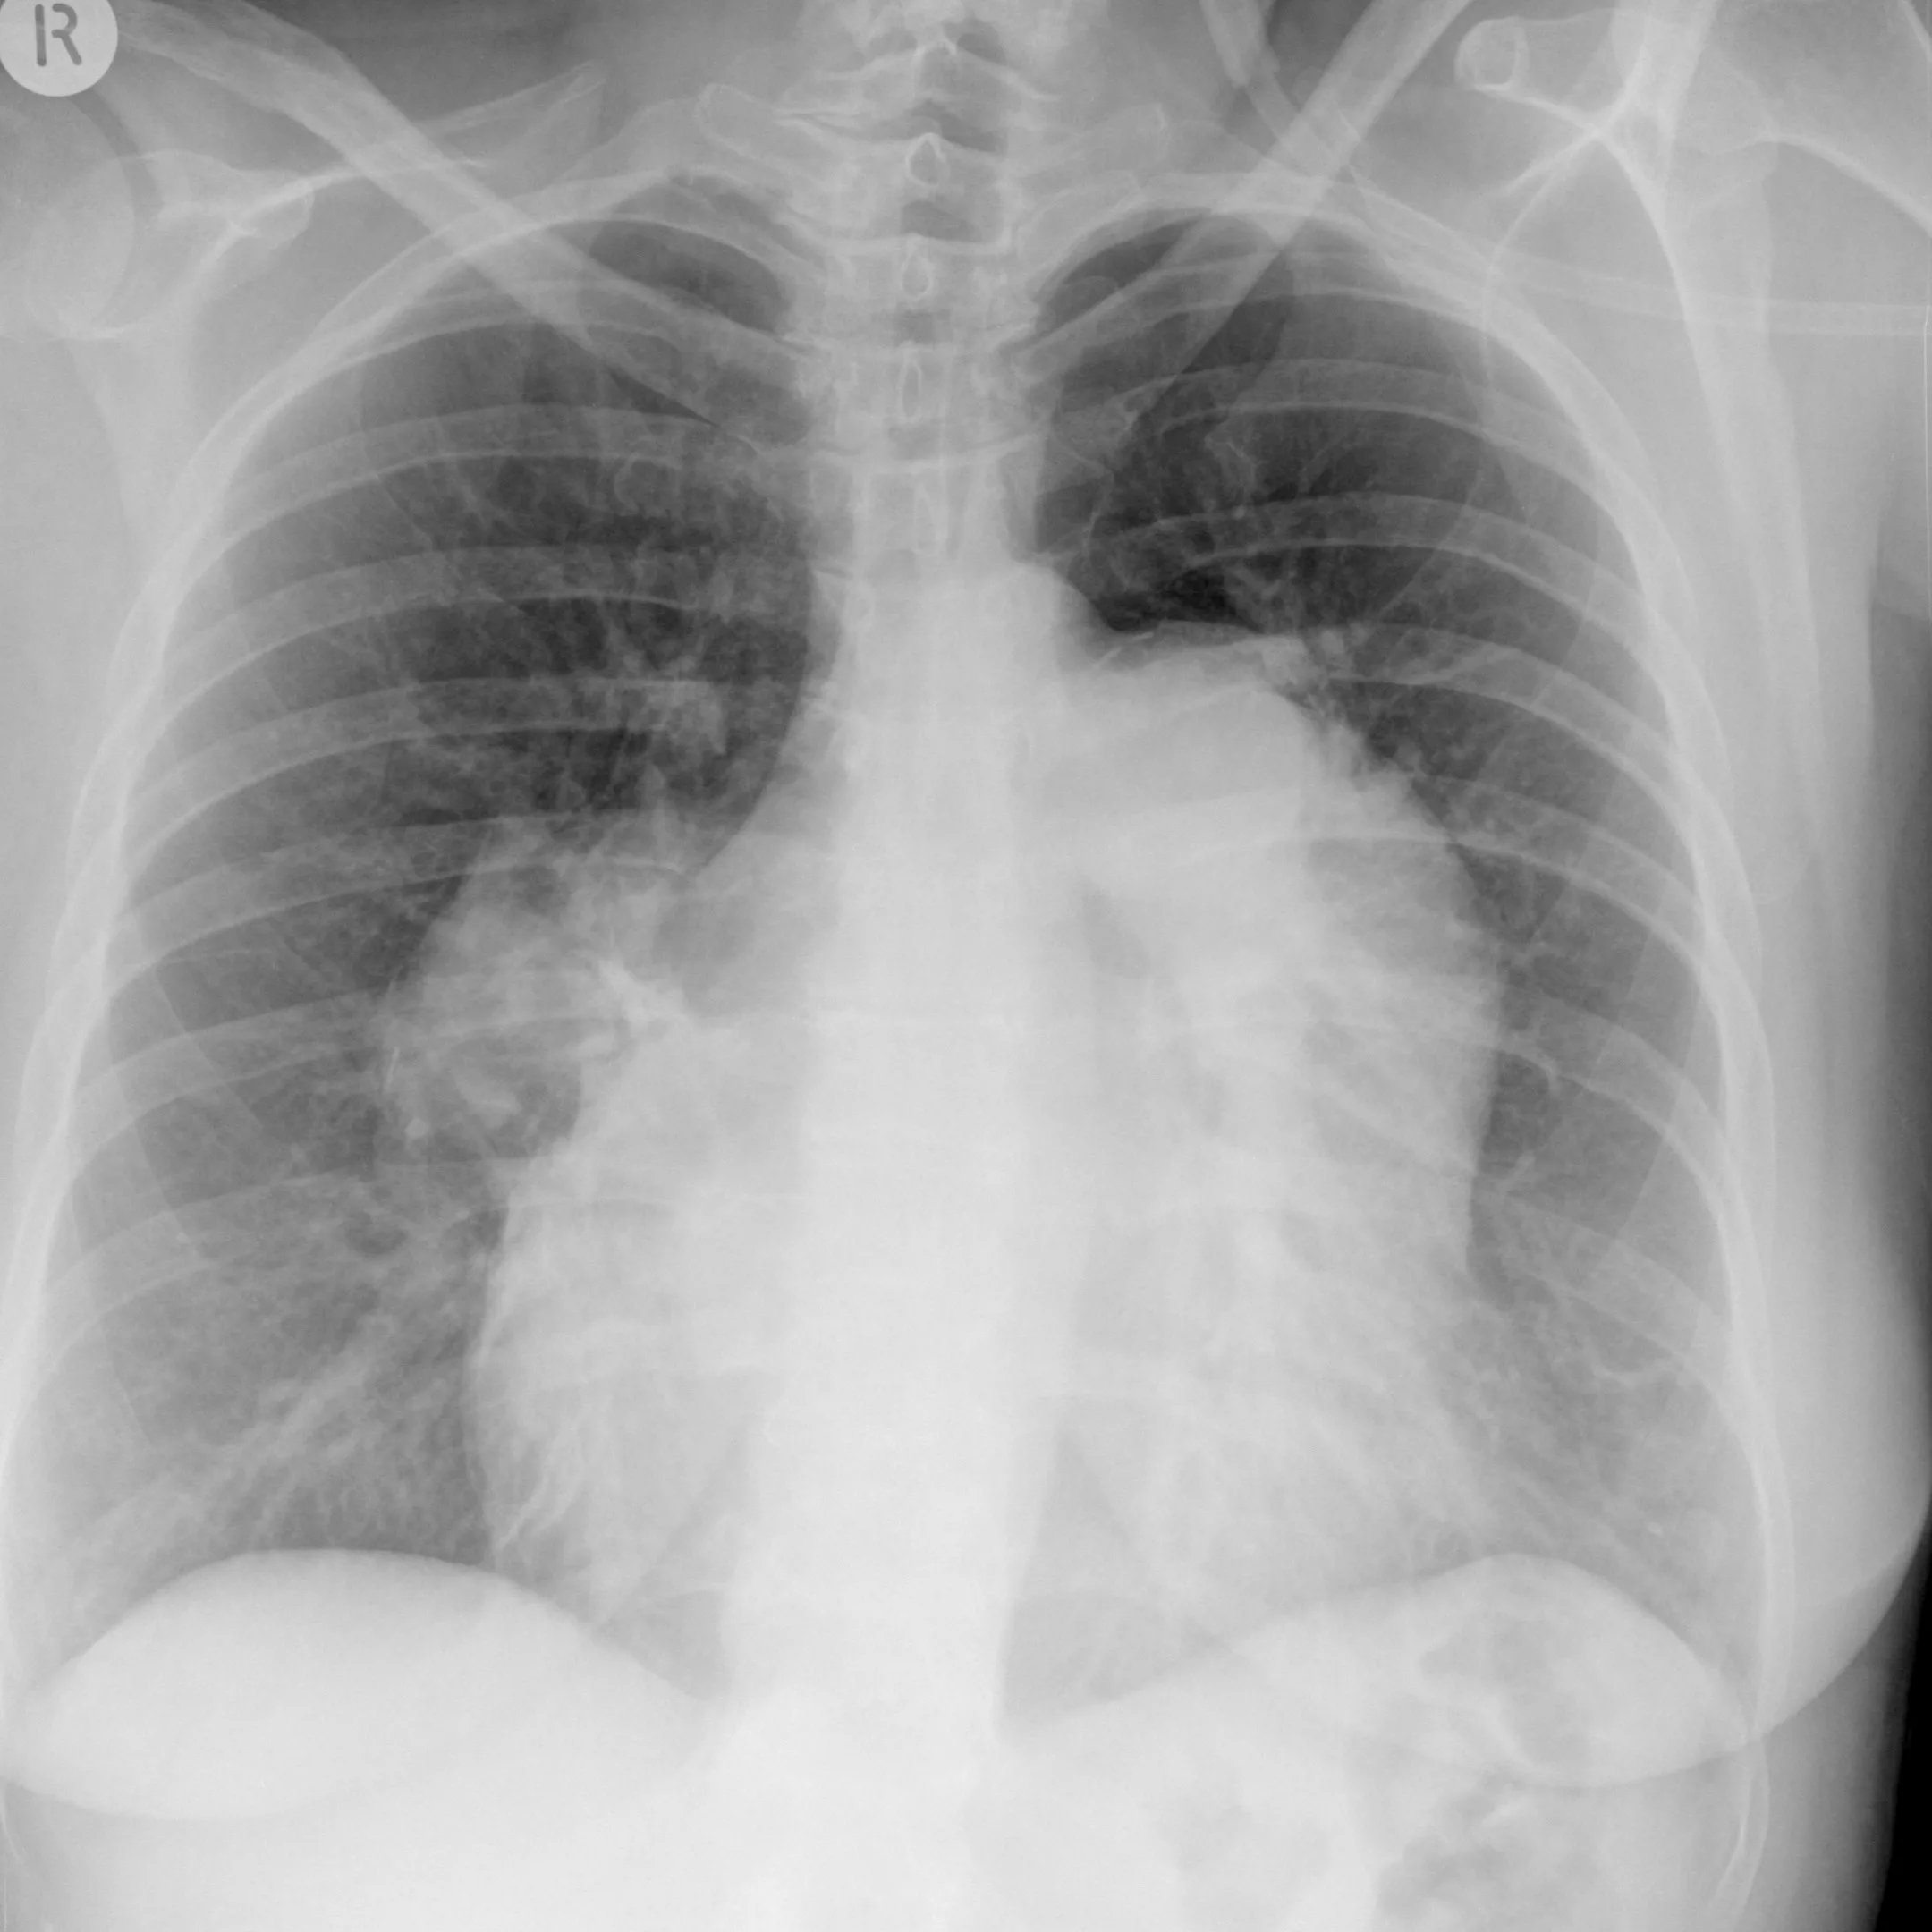 X-Ray shows massive enlargement of the pulmonary trunk and the right and left main pulmonary arteries. 